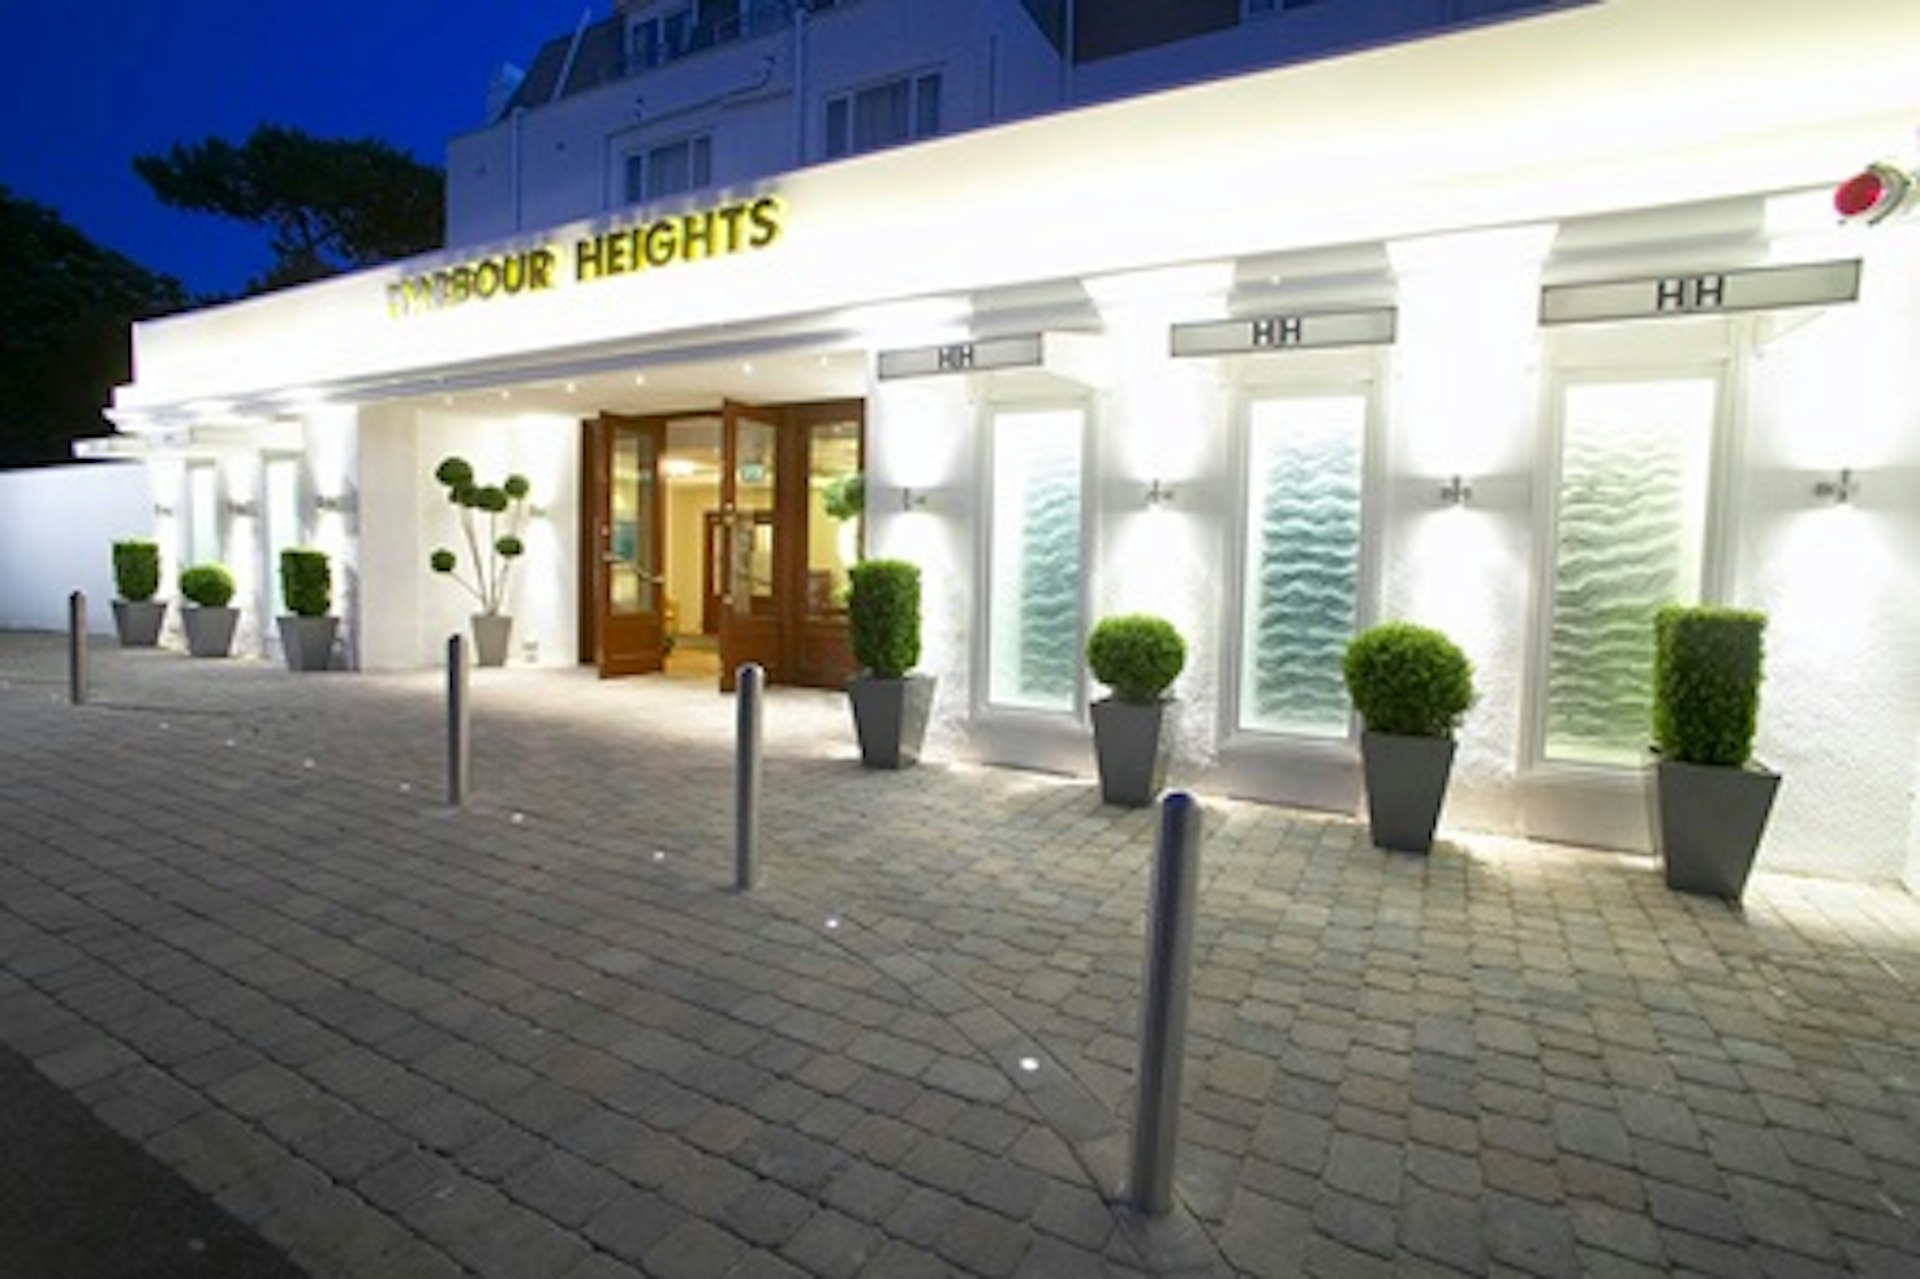 One Night Coastal Break for Two at the 4* Harbour Heights Hotel, Poole 3